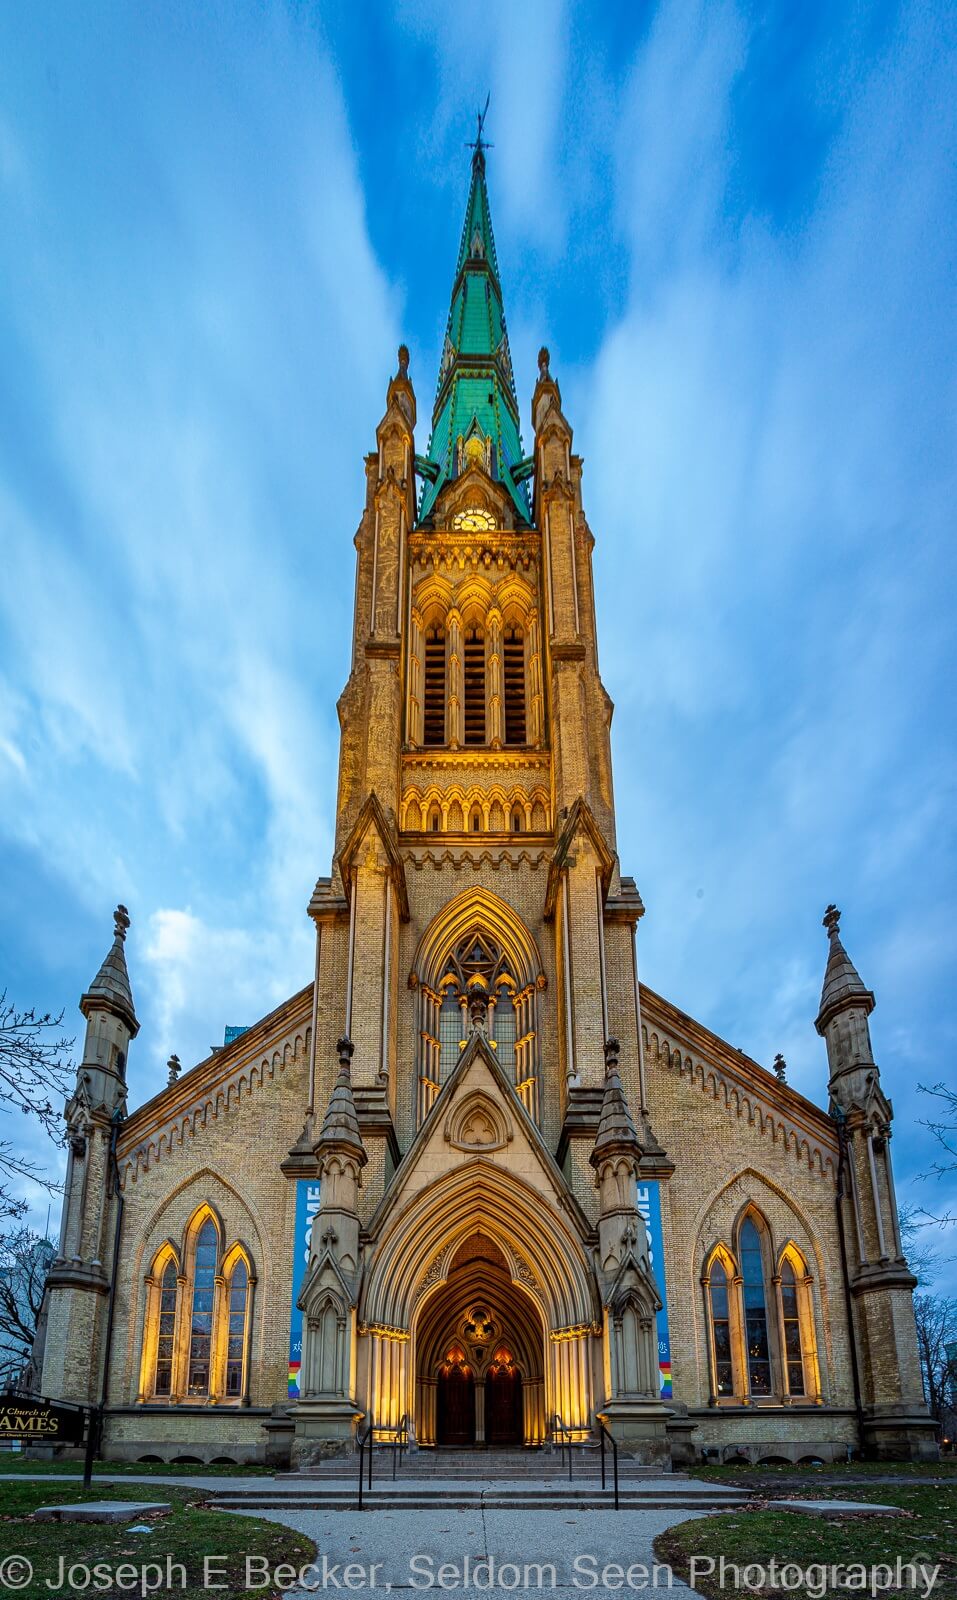 Image of St James Cathedral by Joe Becker